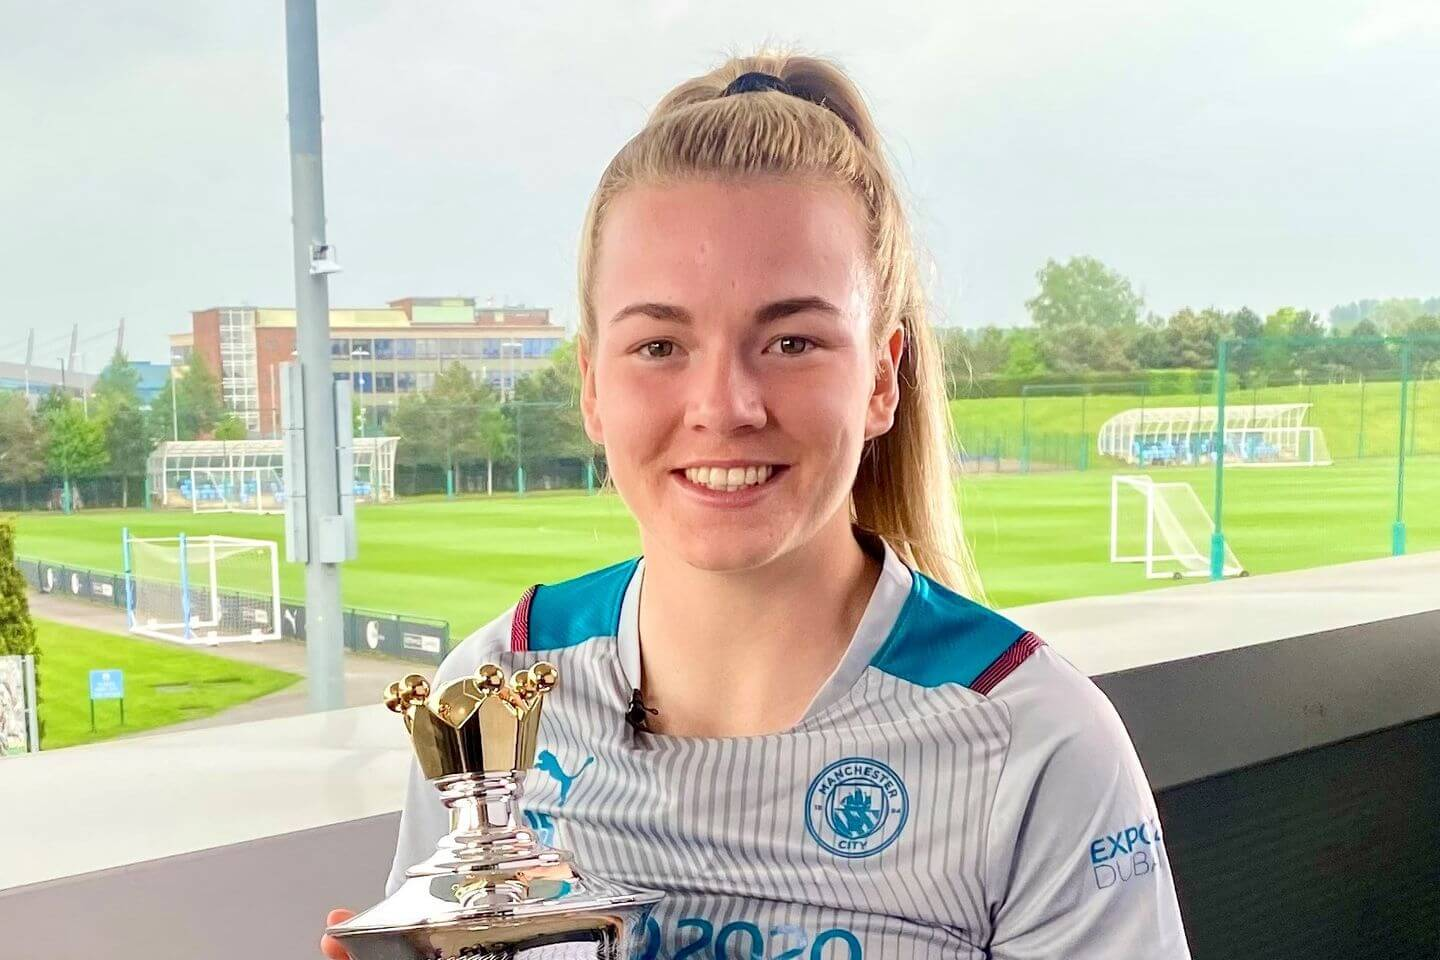 Lauren hemp wiki: The Women's Super League forward Lauren Hemp represents Manchester City. On May 31, 2018, Ms. Hemp joined the company with headquarters in Manchester.